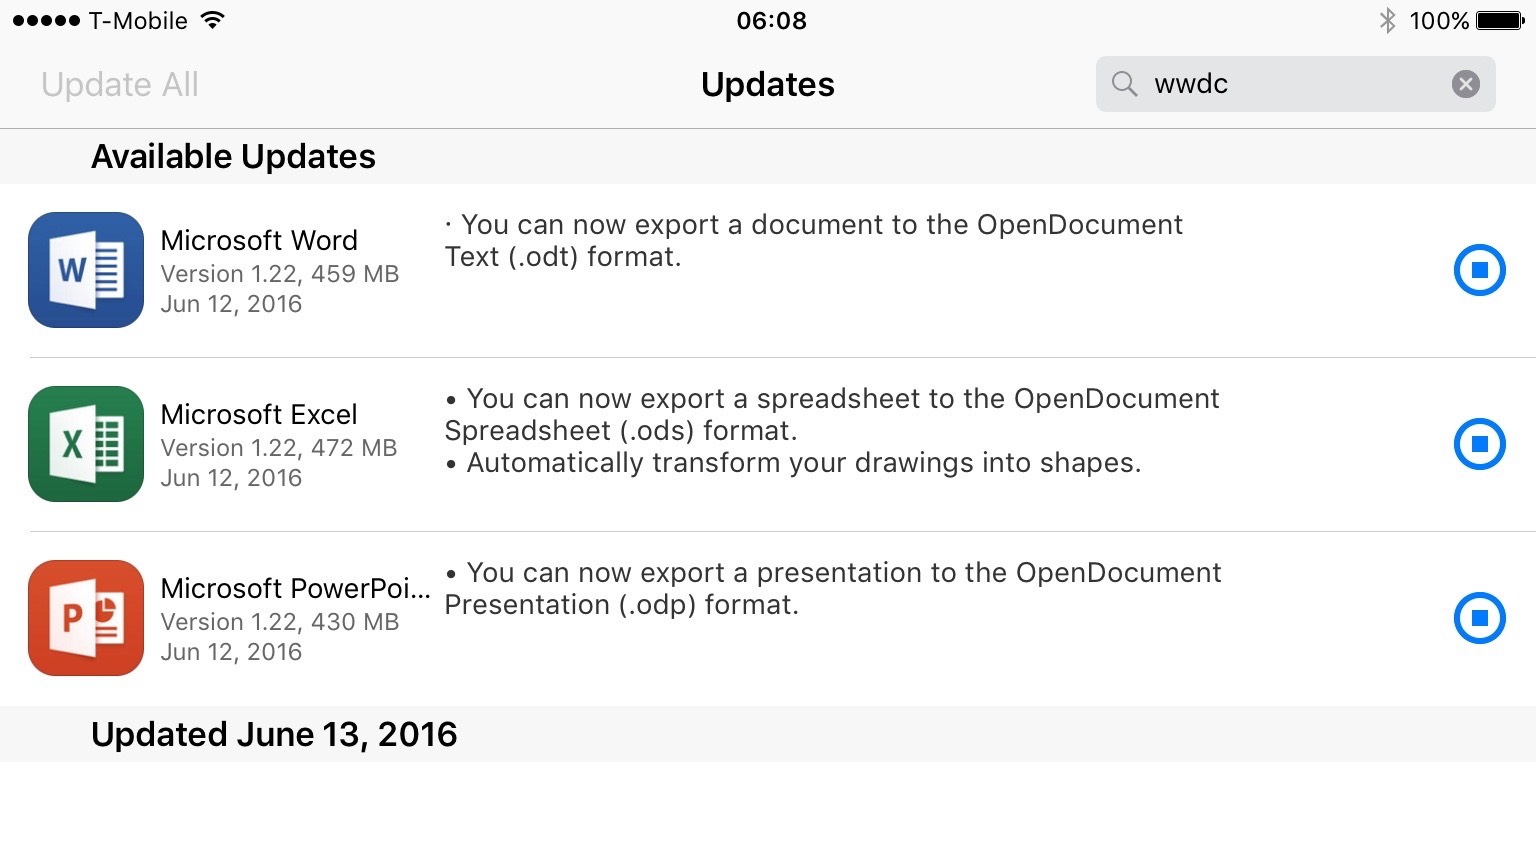 Microsoft Office for iOS supports OpenDocument Format